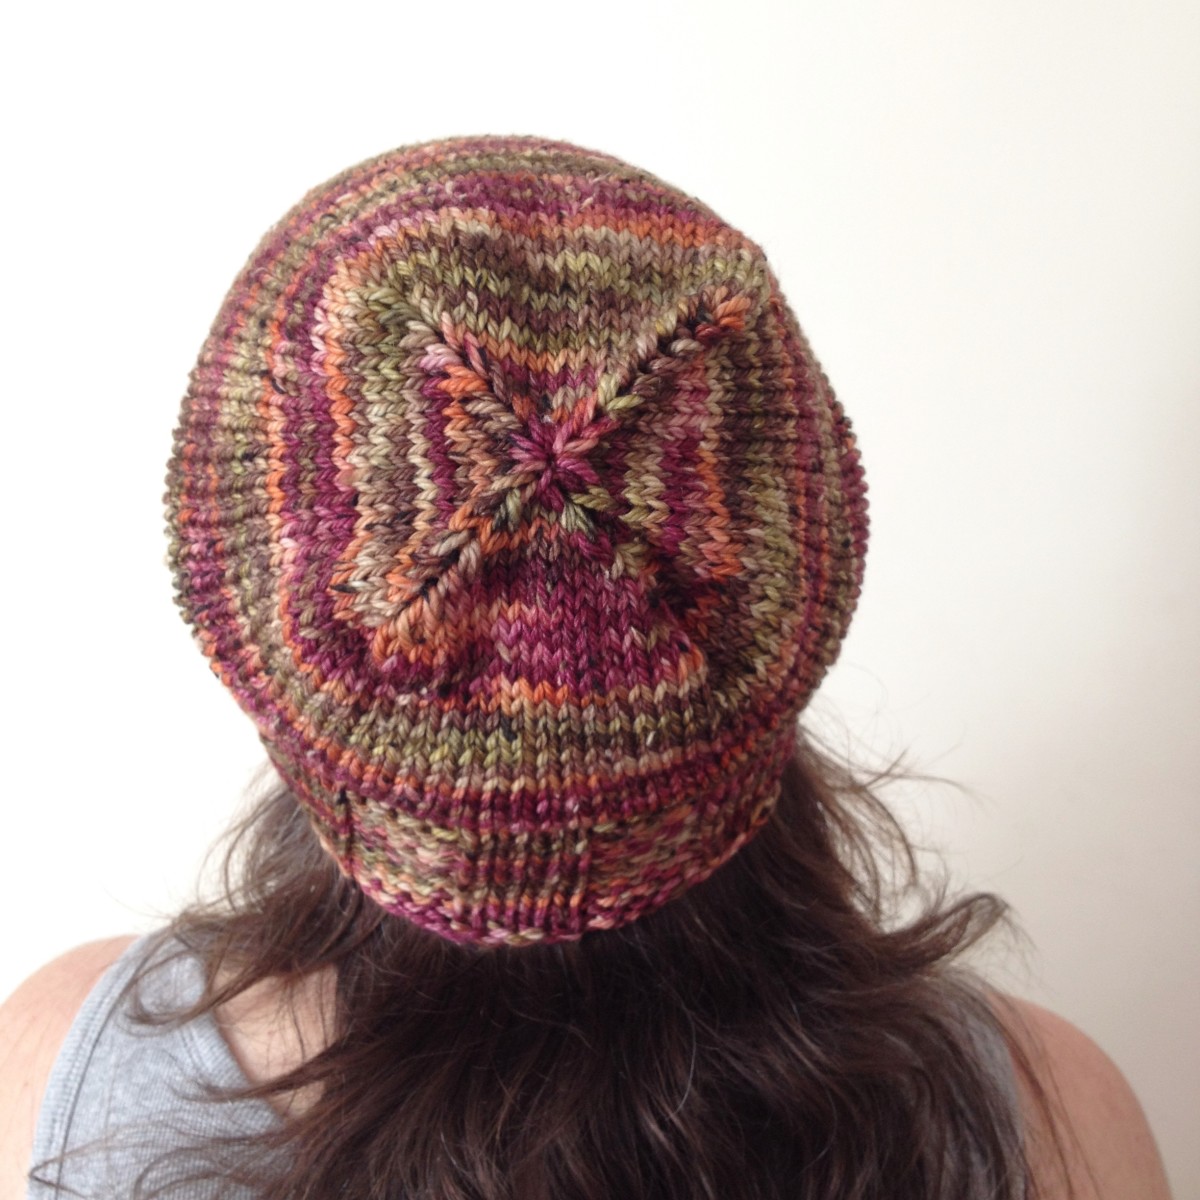 How to Knit a 'Rustic Rambler' Hat